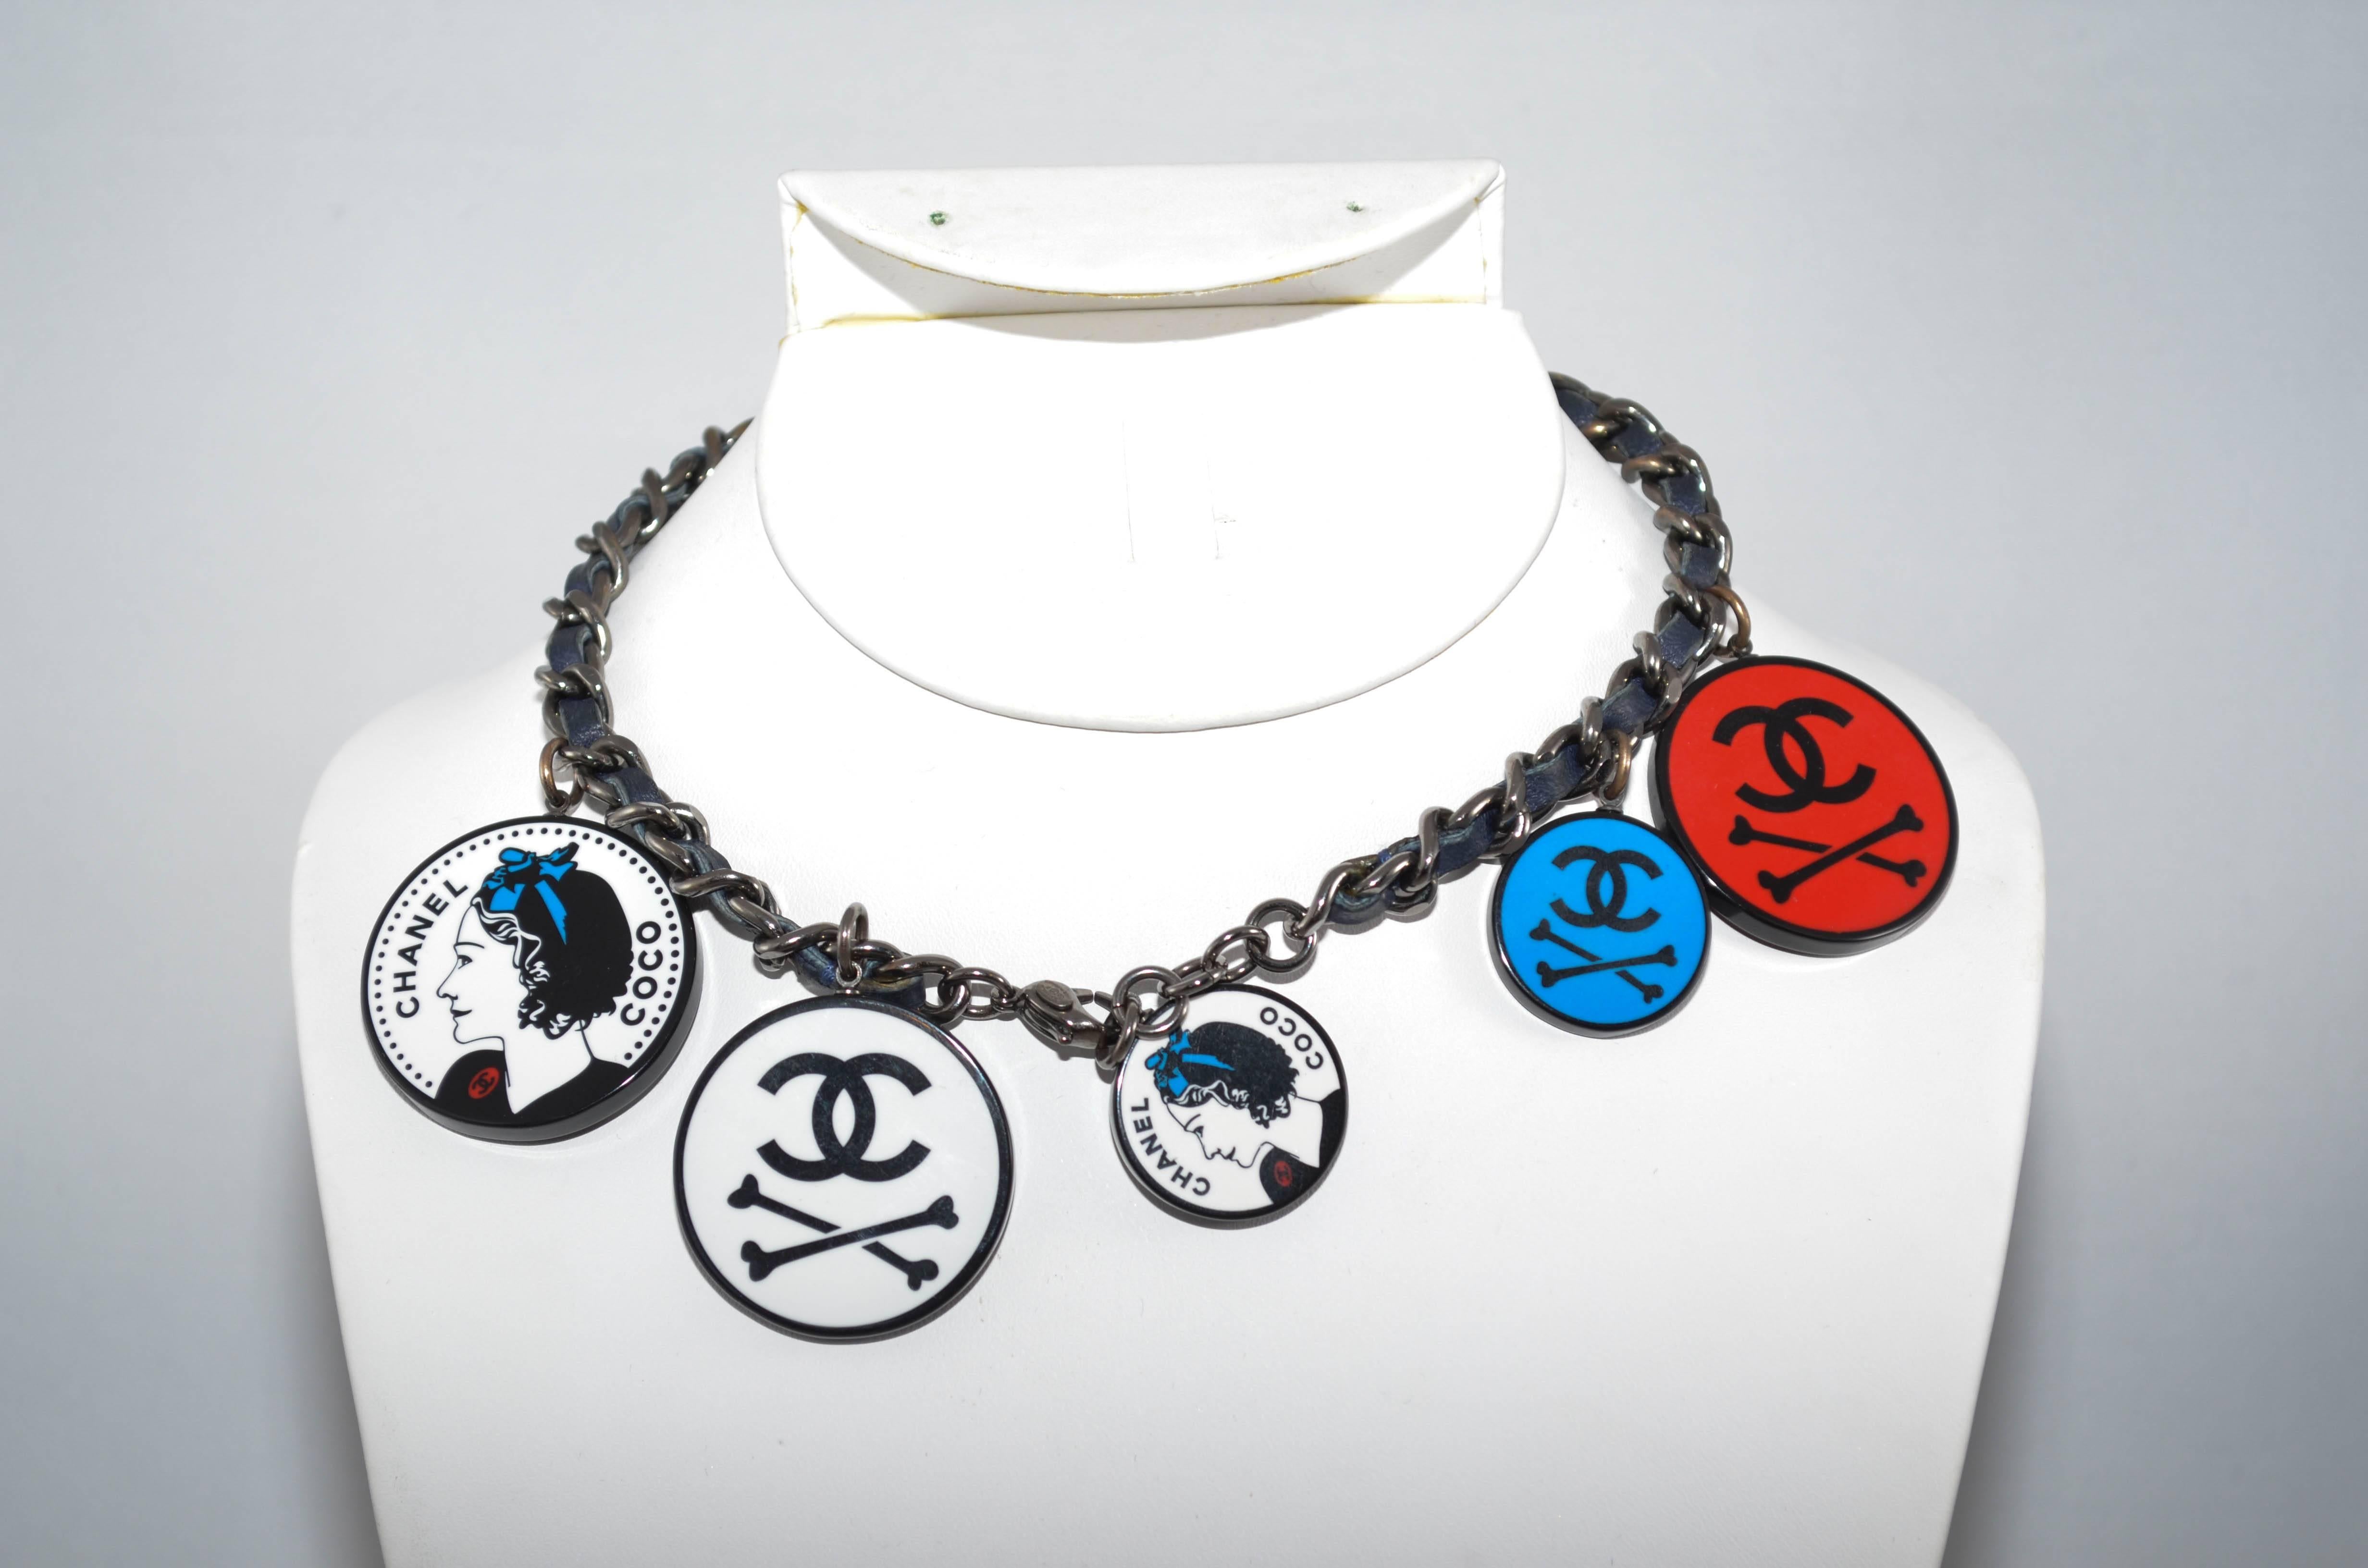 Coco Chanel black leather chain necklace featuring distinct Coco Chanel pendants 
with trademark CC. Cross bone pendants in red and black, white and black, and blue and black. Pendants in two different sizes; small 1